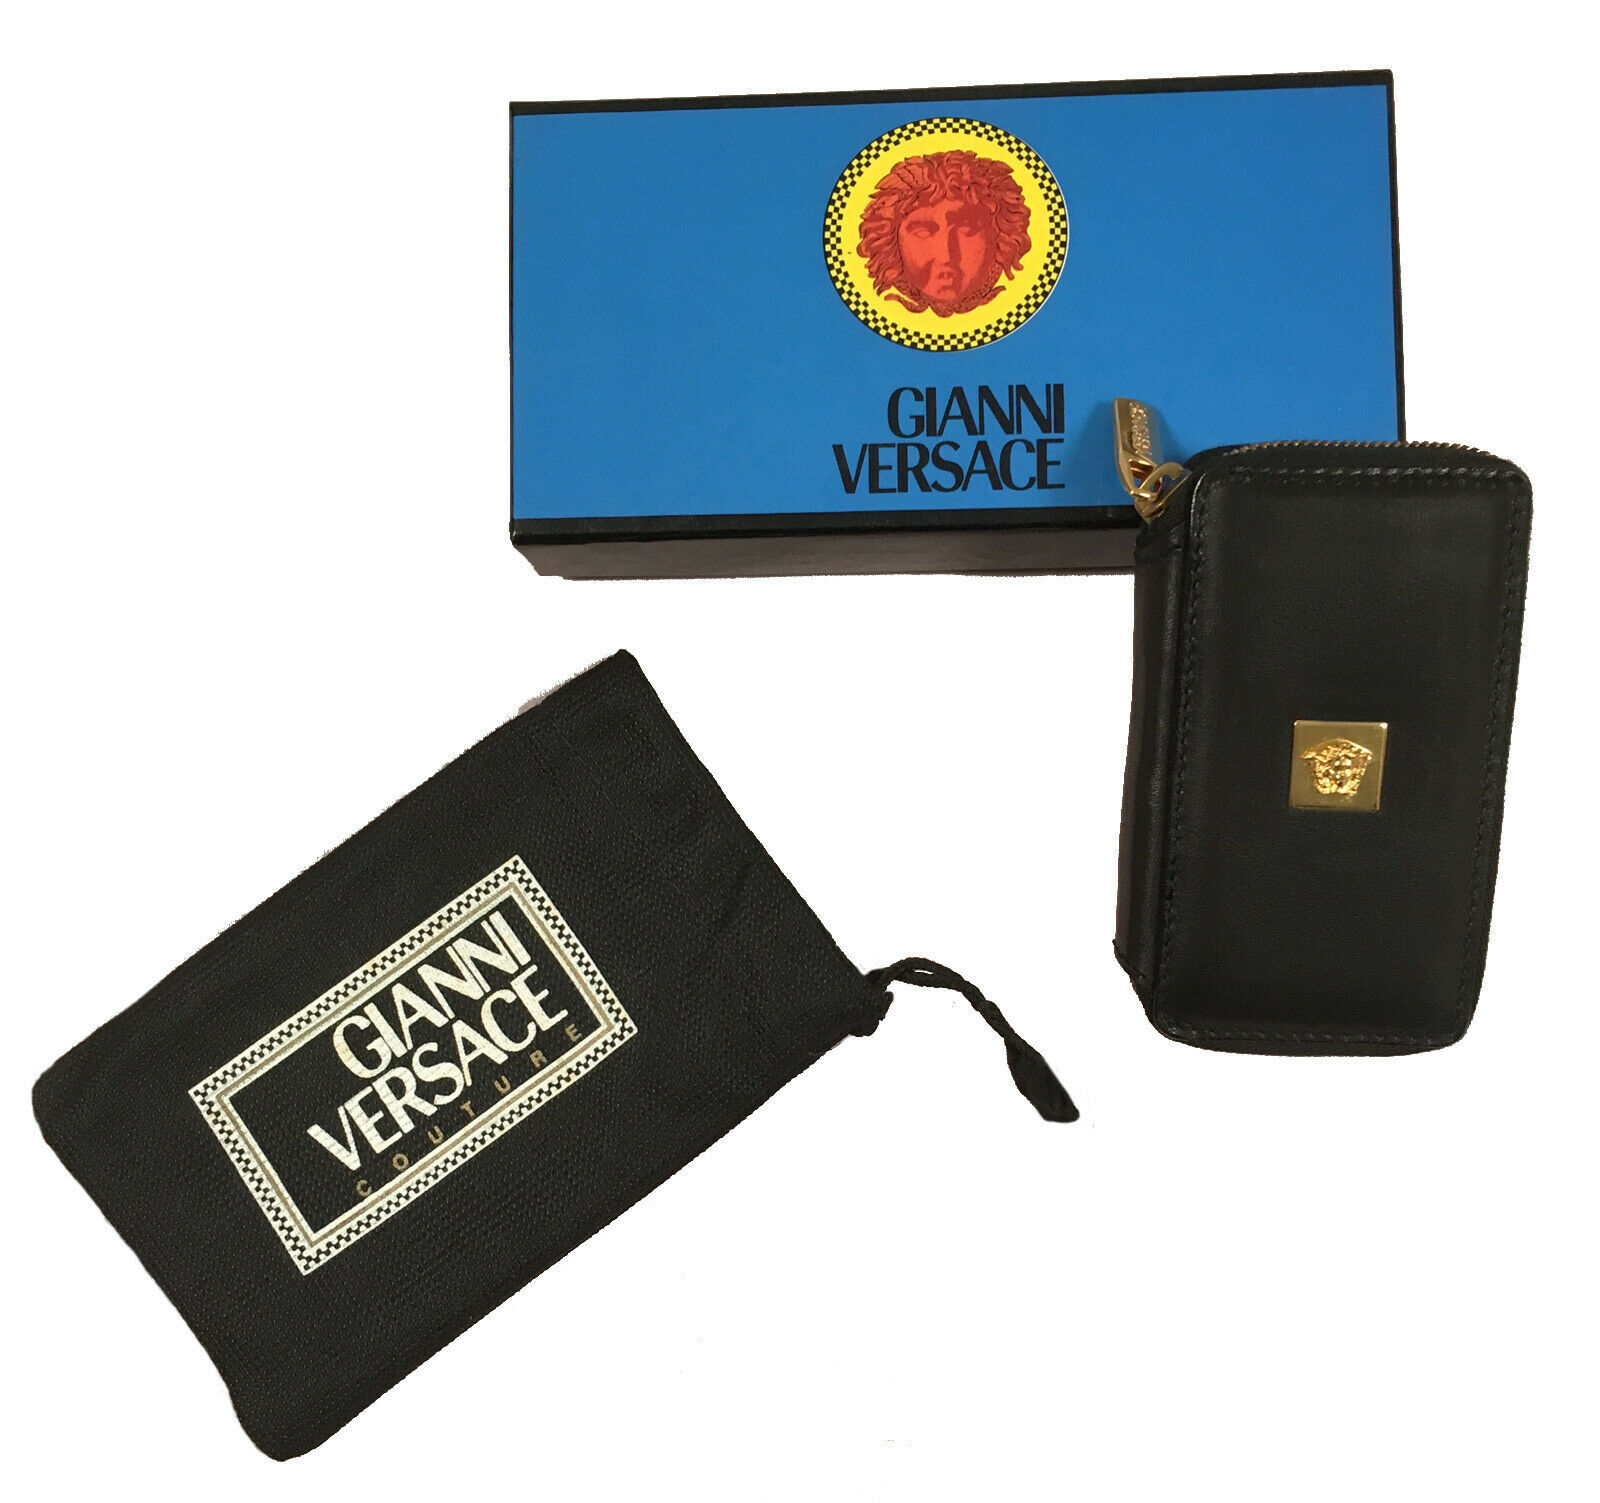 NEW IN BOX Vintage 90's Gianni Versace Leather Key Holder (Case) Collectors Item - $299.99